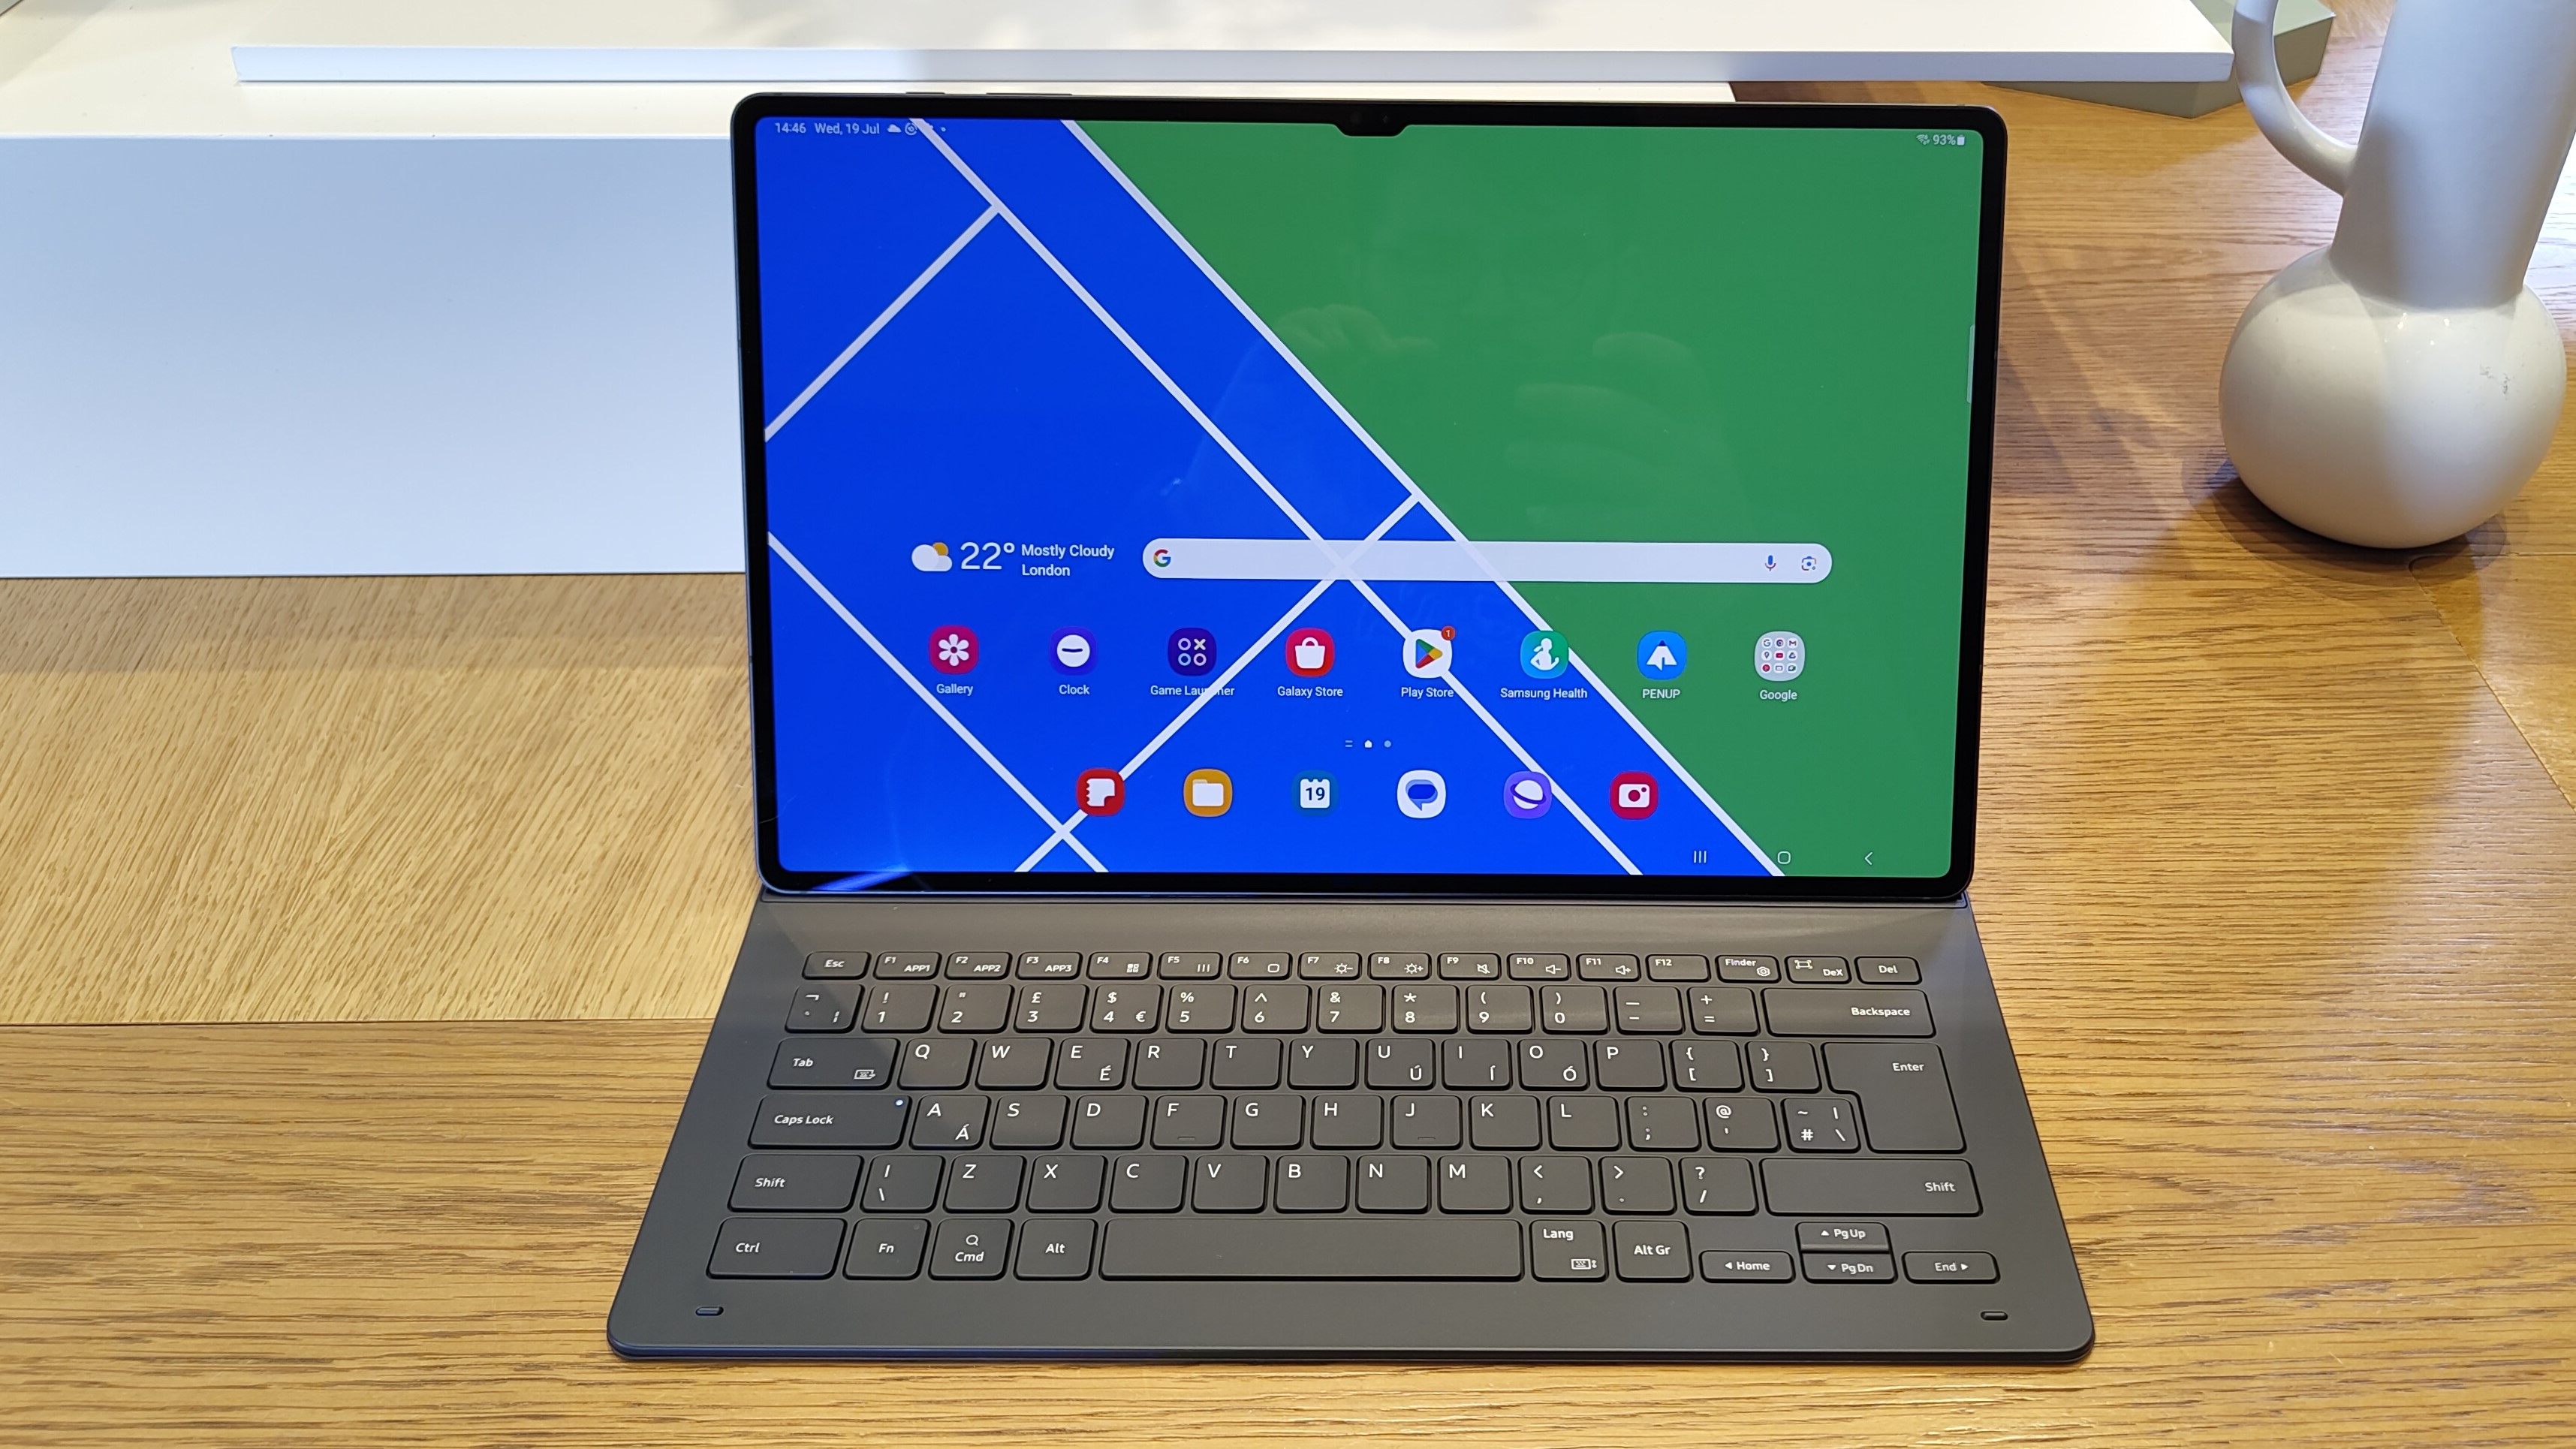 Samsung Galaxy Tab S9 Plus hands-on review: Come for the AMOLED, stay for  the speakers